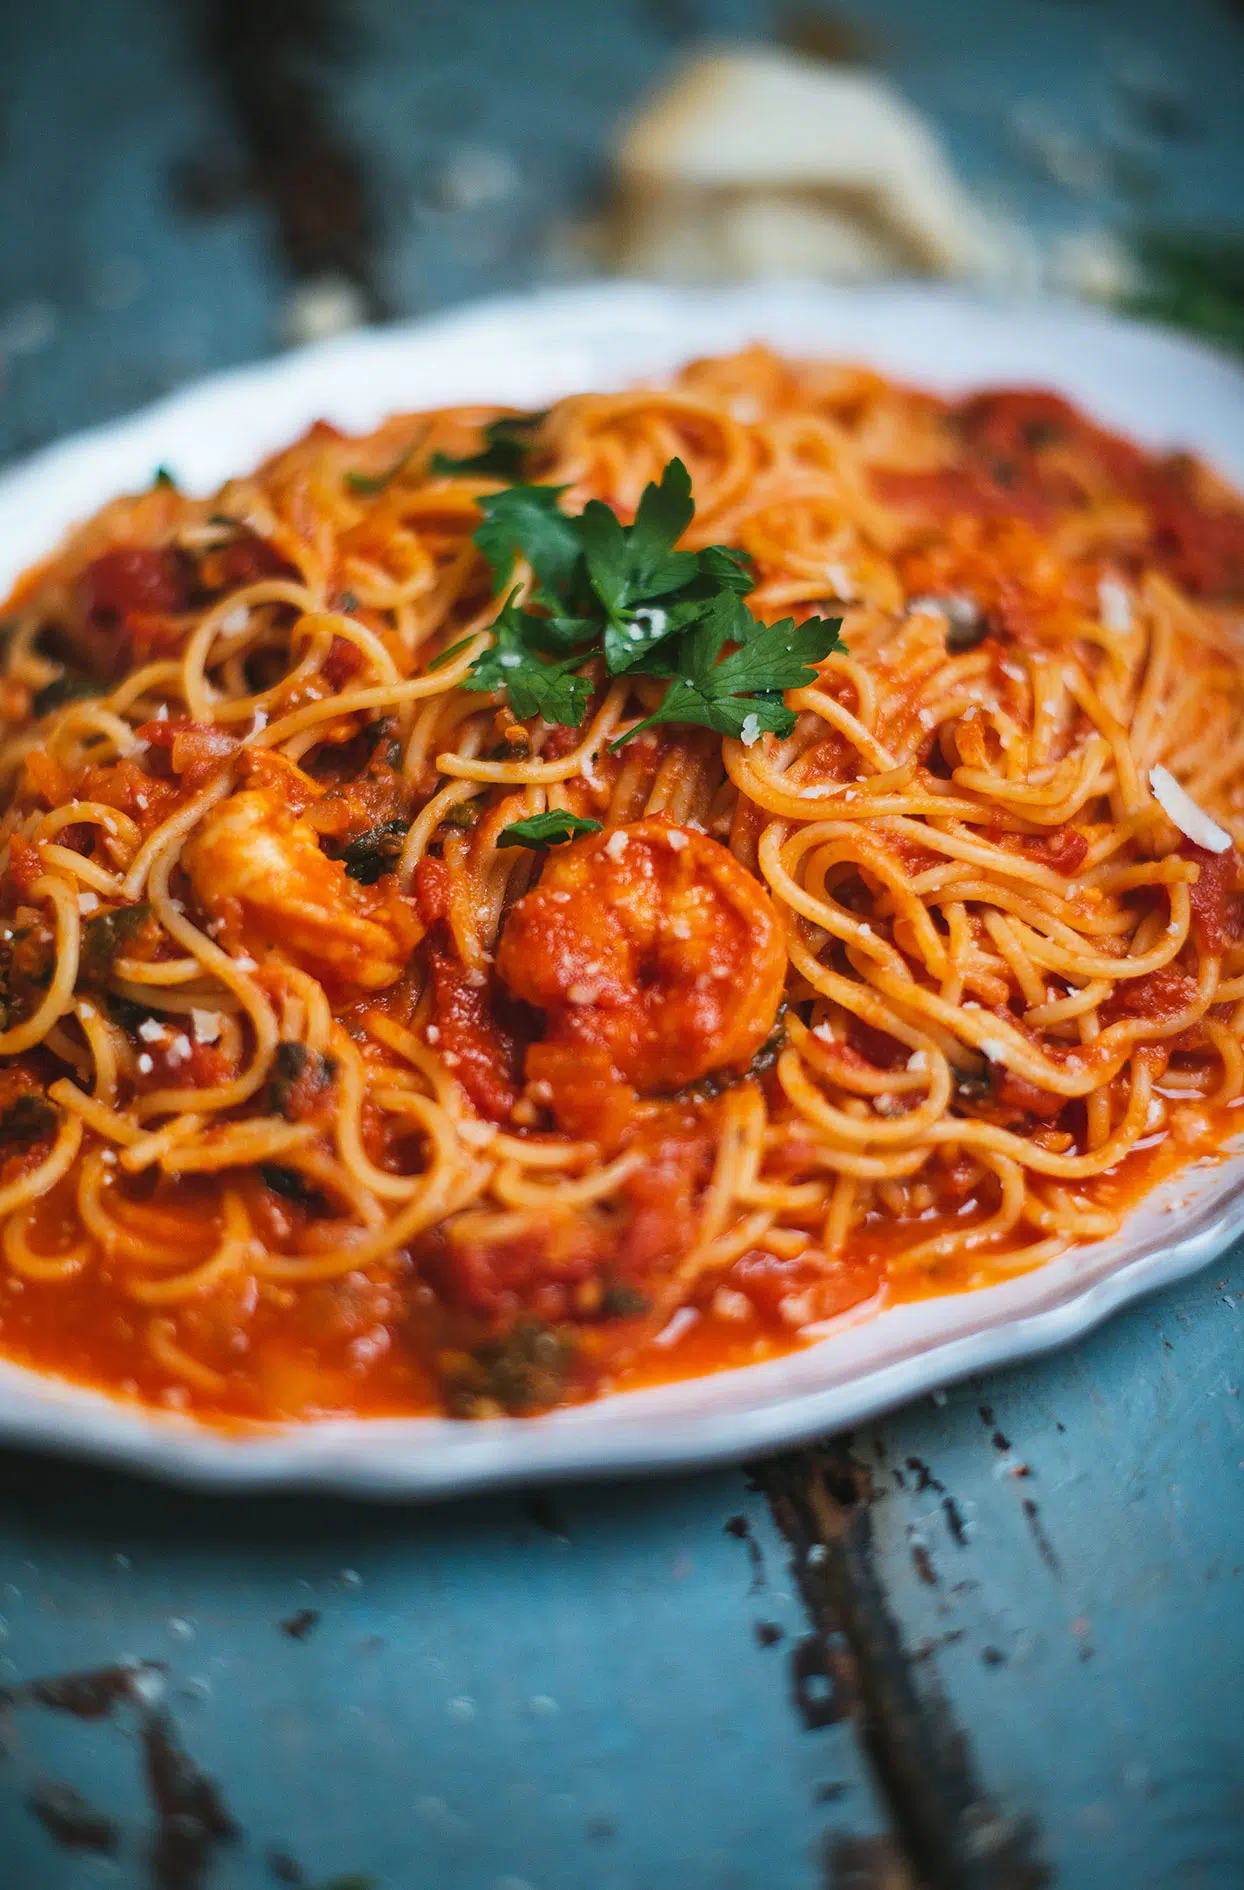 Spicy spaghettinis with tomatoes and shrimps